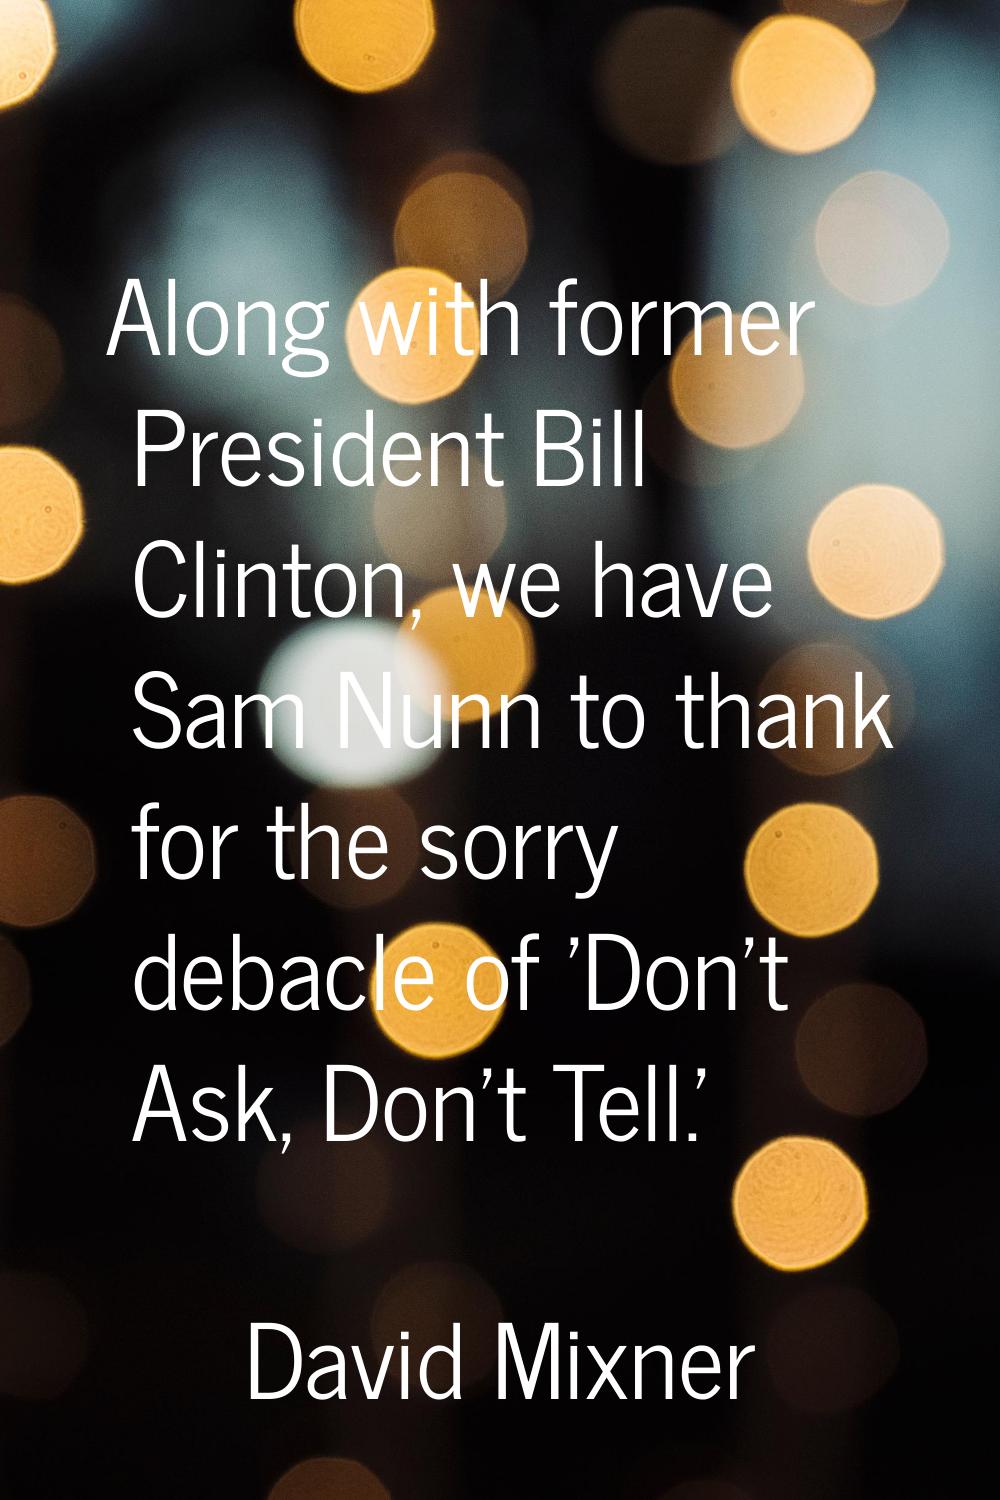 Along with former President Bill Clinton, we have Sam Nunn to thank for the sorry debacle of 'Don't